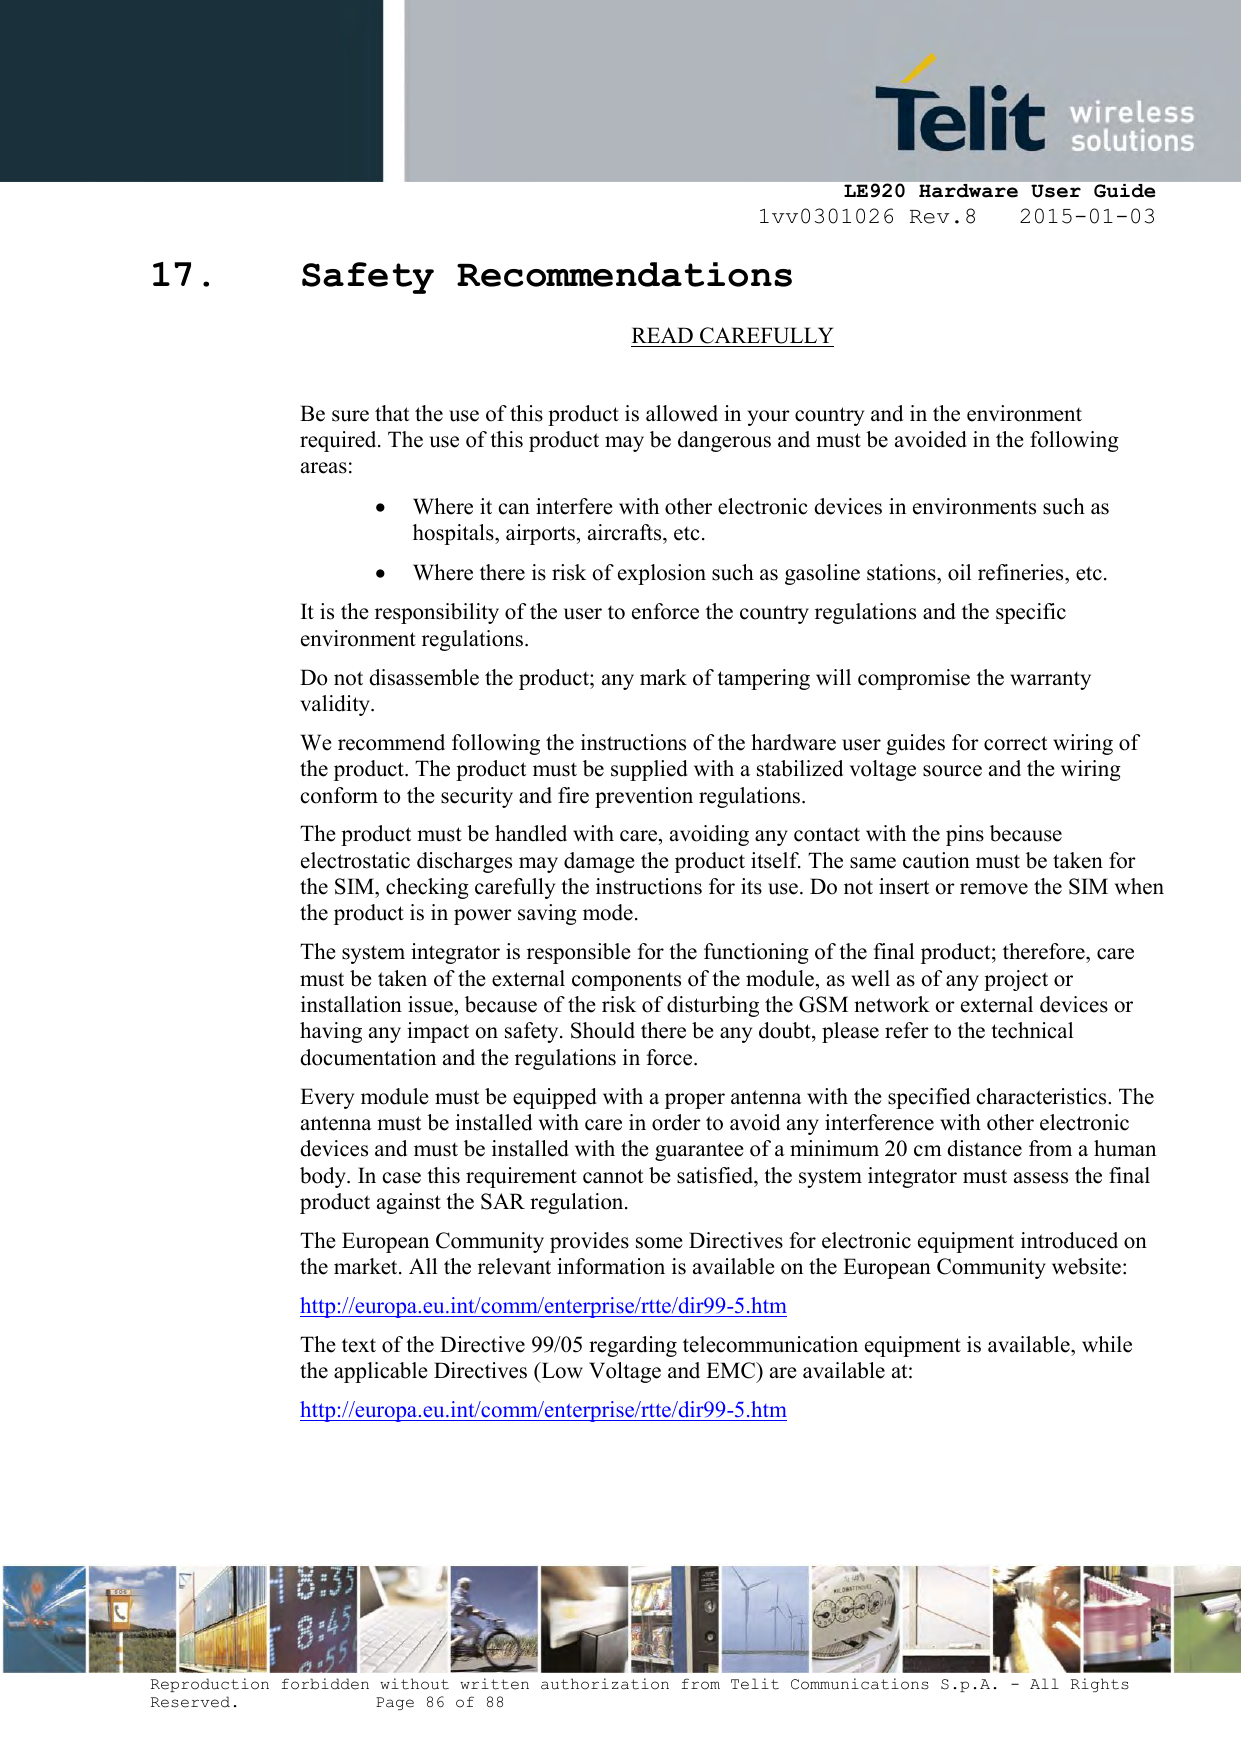     LE920 Hardware User Guide 1vv0301026 Rev.8   2015-01-03 Reproduction forbidden without written authorization from Telit Communications S.p.A. - All Rights Reserved.    Page 86 of 88  17. Safety Recommendations READ CAREFULLY  Be sure that the use of this product is allowed in your country and in the environment required. The use of this product may be dangerous and must be avoided in the following areas:  Where it can interfere with other electronic devices in environments such as hospitals, airports, aircrafts, etc.  Where there is risk of explosion such as gasoline stations, oil refineries, etc.  It is the responsibility of the user to enforce the country regulations and the specific environment regulations. Do not disassemble the product; any mark of tampering will compromise the warranty validity. We recommend following the instructions of the hardware user guides for correct wiring of the product. The product must be supplied with a stabilized voltage source and the wiring conform to the security and fire prevention regulations. The product must be handled with care, avoiding any contact with the pins because electrostatic discharges may damage the product itself. The same caution must be taken for the SIM, checking carefully the instructions for its use. Do not insert or remove the SIM when the product is in power saving mode. The system integrator is responsible for the functioning of the final product; therefore, care must be taken of the external components of the module, as well as of any project or installation issue, because of the risk of disturbing the GSM network or external devices or having any impact on safety. Should there be any doubt, please refer to the technical documentation and the regulations in force. Every module must be equipped with a proper antenna with the specified characteristics. The antenna must be installed with care in order to avoid any interference with other electronic devices and must be installed with the guarantee of a minimum 20 cm distance from a human body. In case this requirement cannot be satisfied, the system integrator must assess the final product against the SAR regulation. The European Community provides some Directives for electronic equipment introduced on the market. All the relevant information is available on the European Community website: http://europa.eu.int/comm/enterprise/rtte/dir99-5.htm The text of the Directive 99/05 regarding telecommunication equipment is available, while the applicable Directives (Low Voltage and EMC) are available at: http://europa.eu.int/comm/enterprise/rtte/dir99-5.htm  